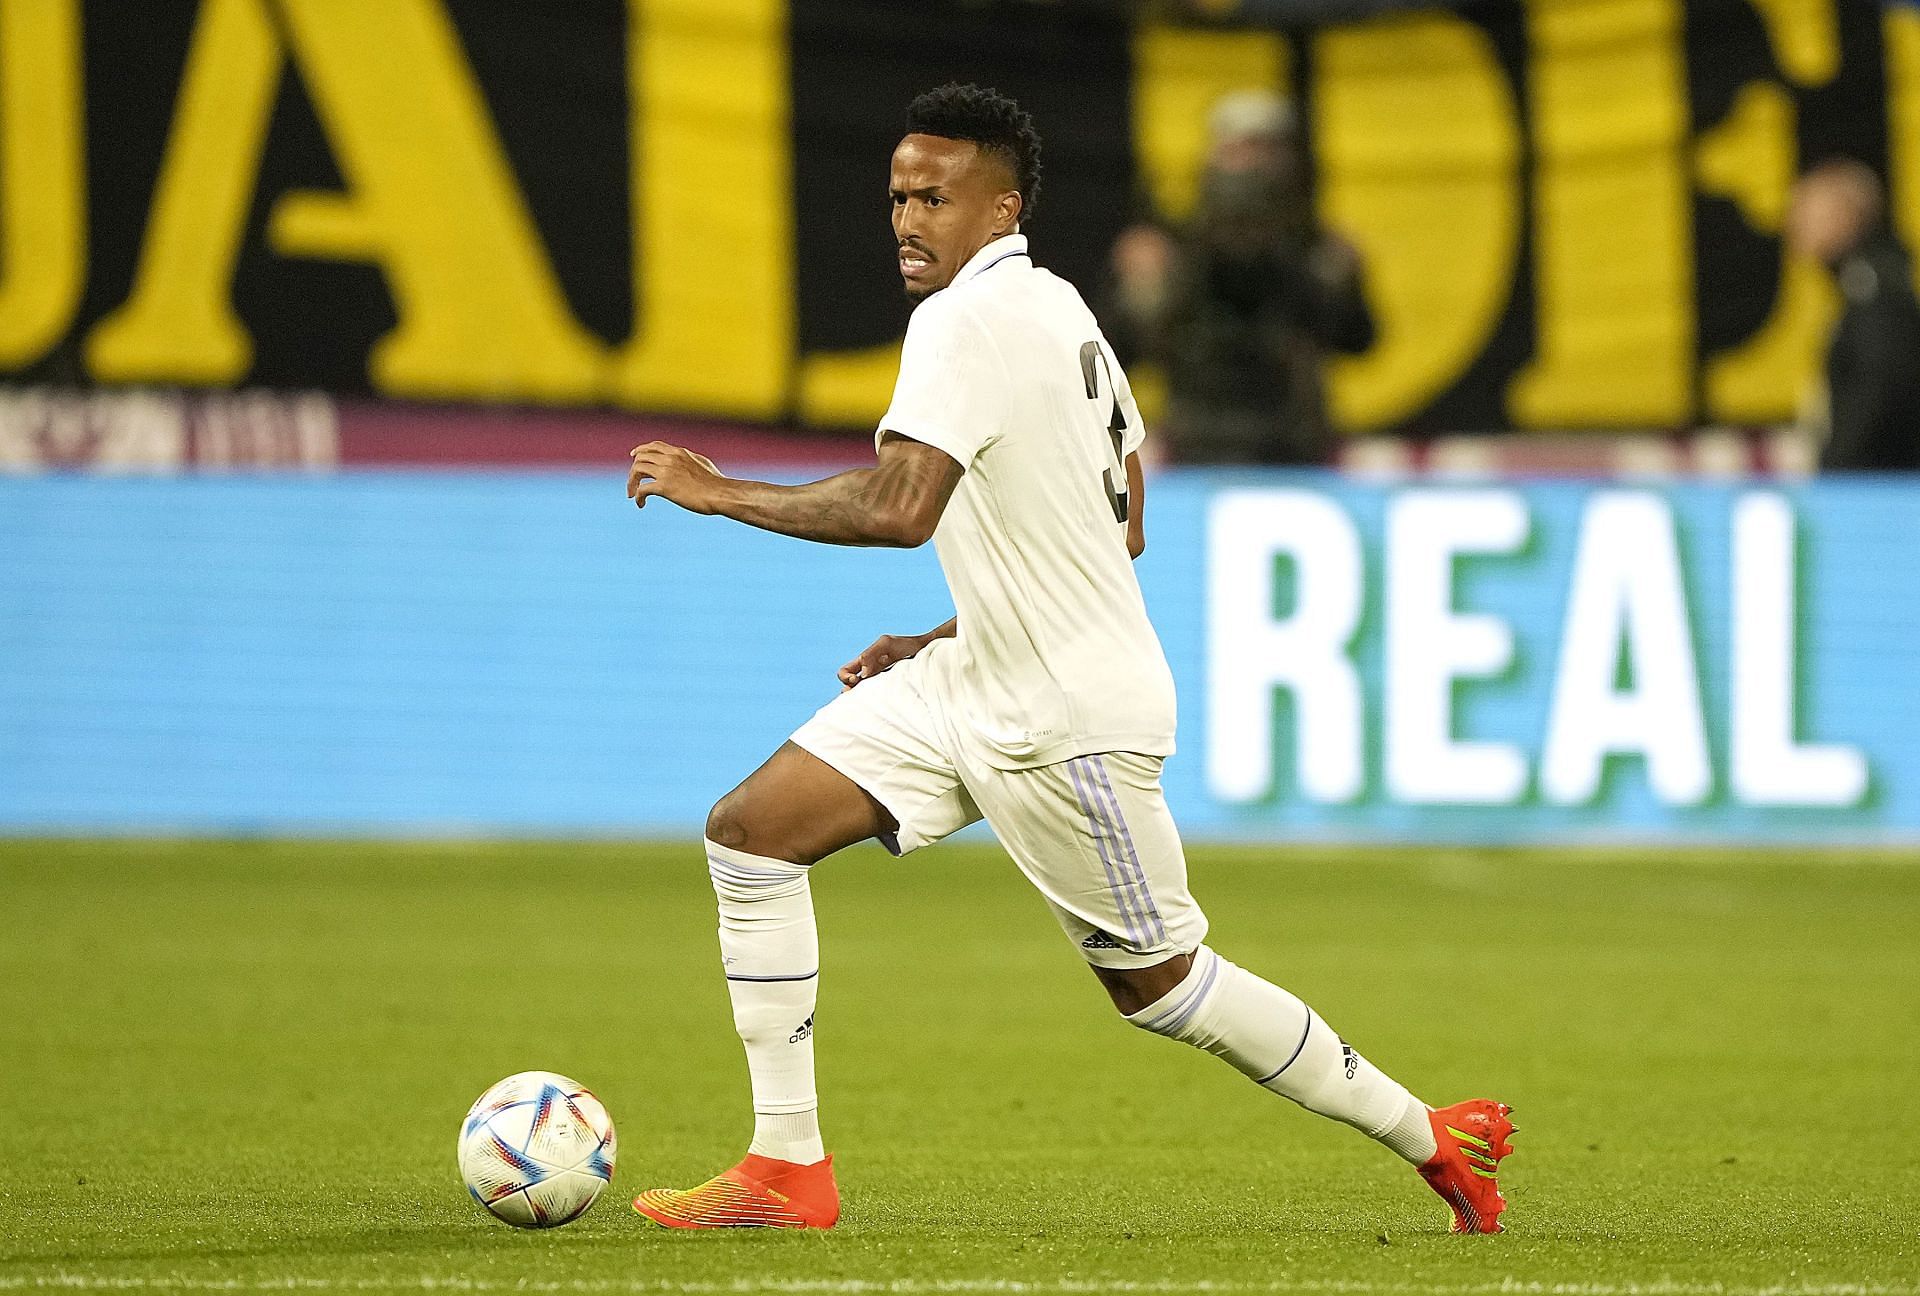 Militao in action against Club America in the USA